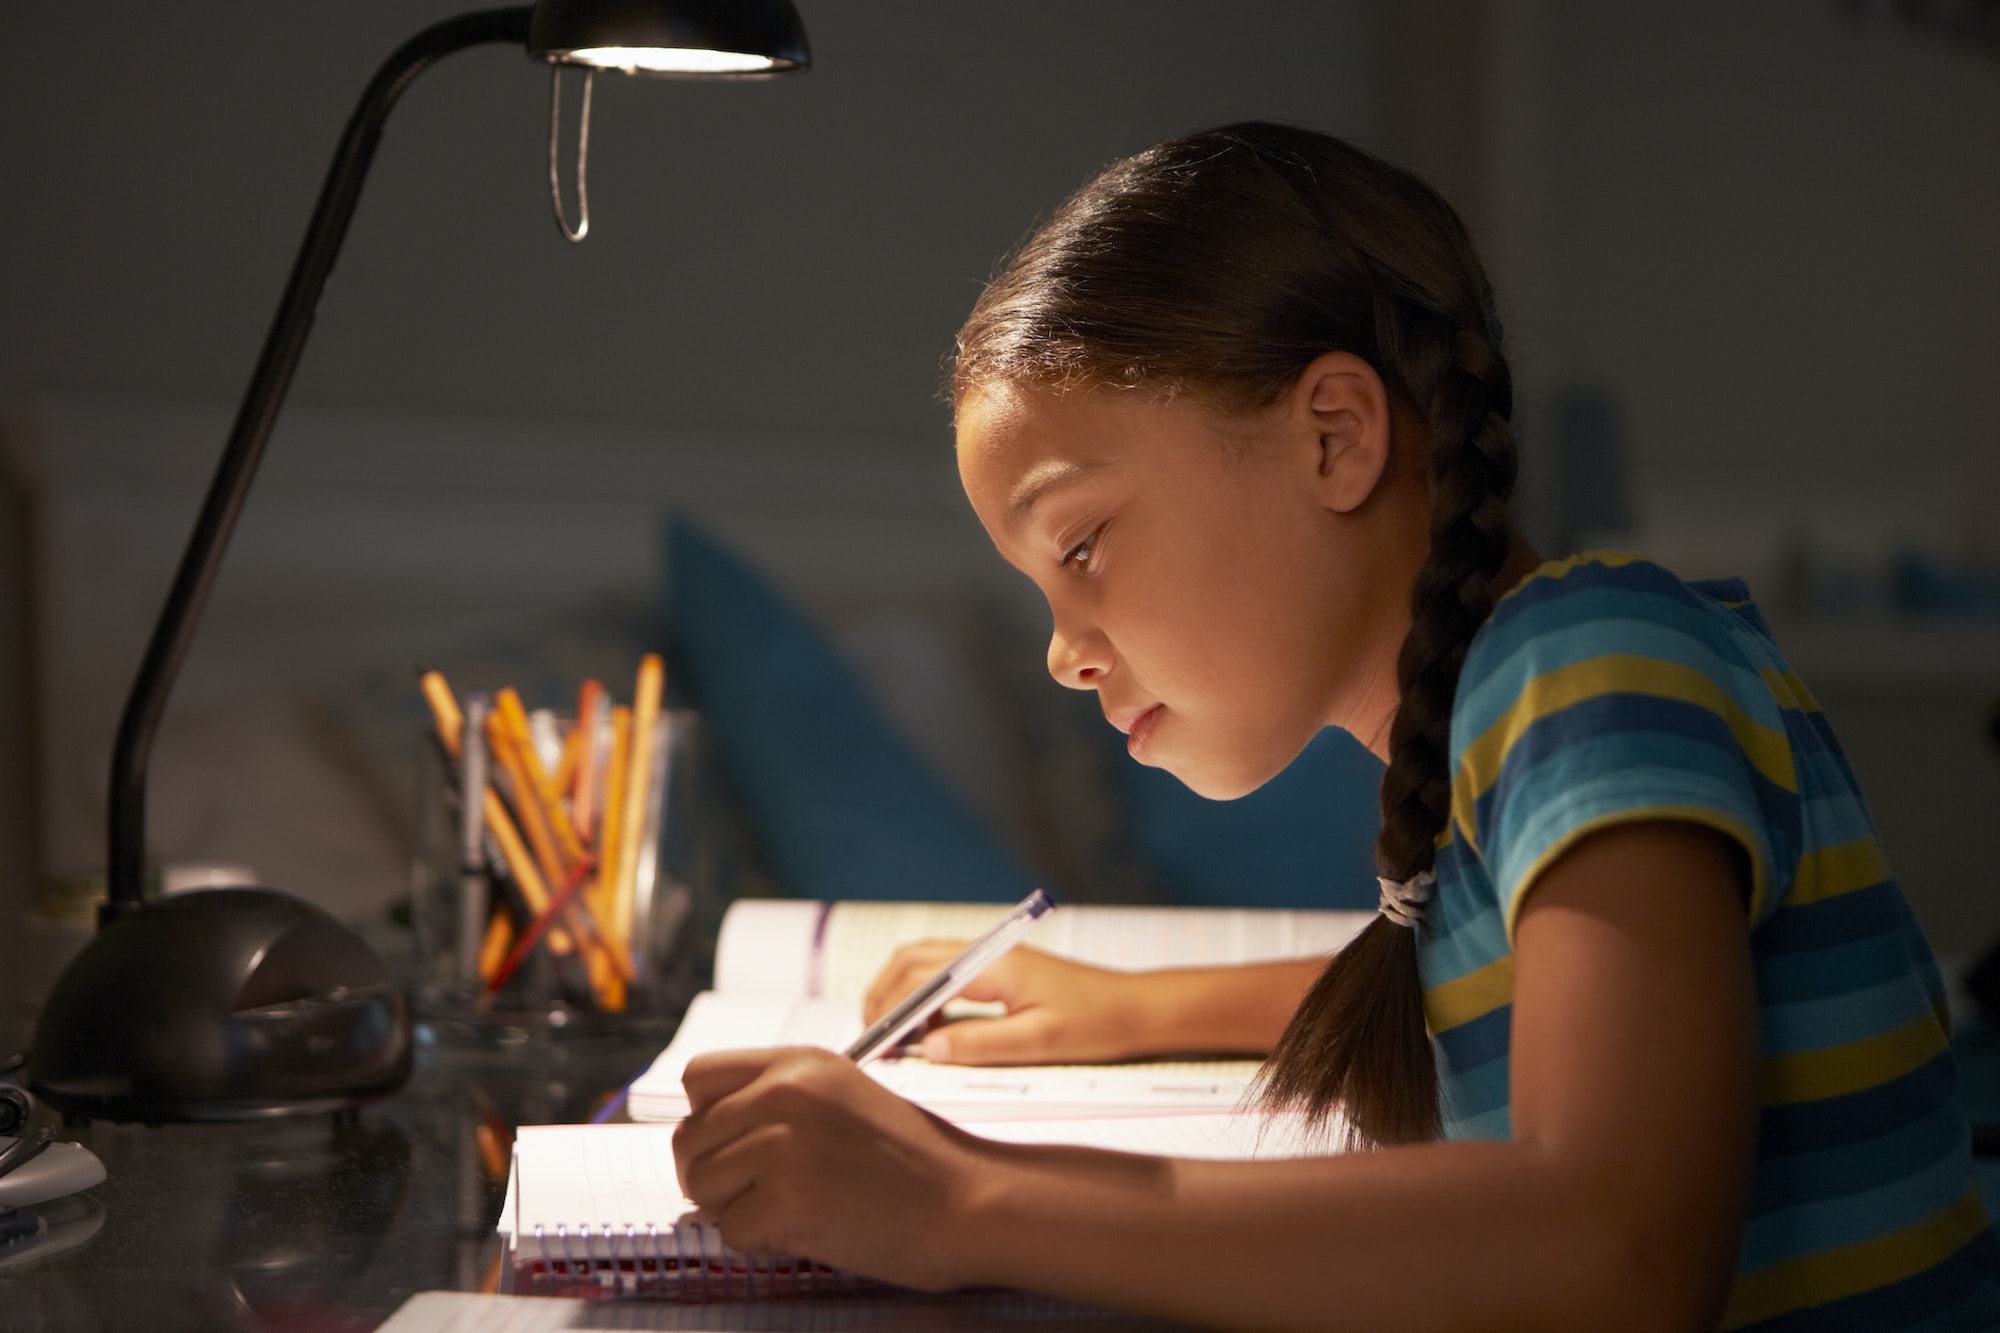 Young Girl Studying At Desk In Bedroom In Evening